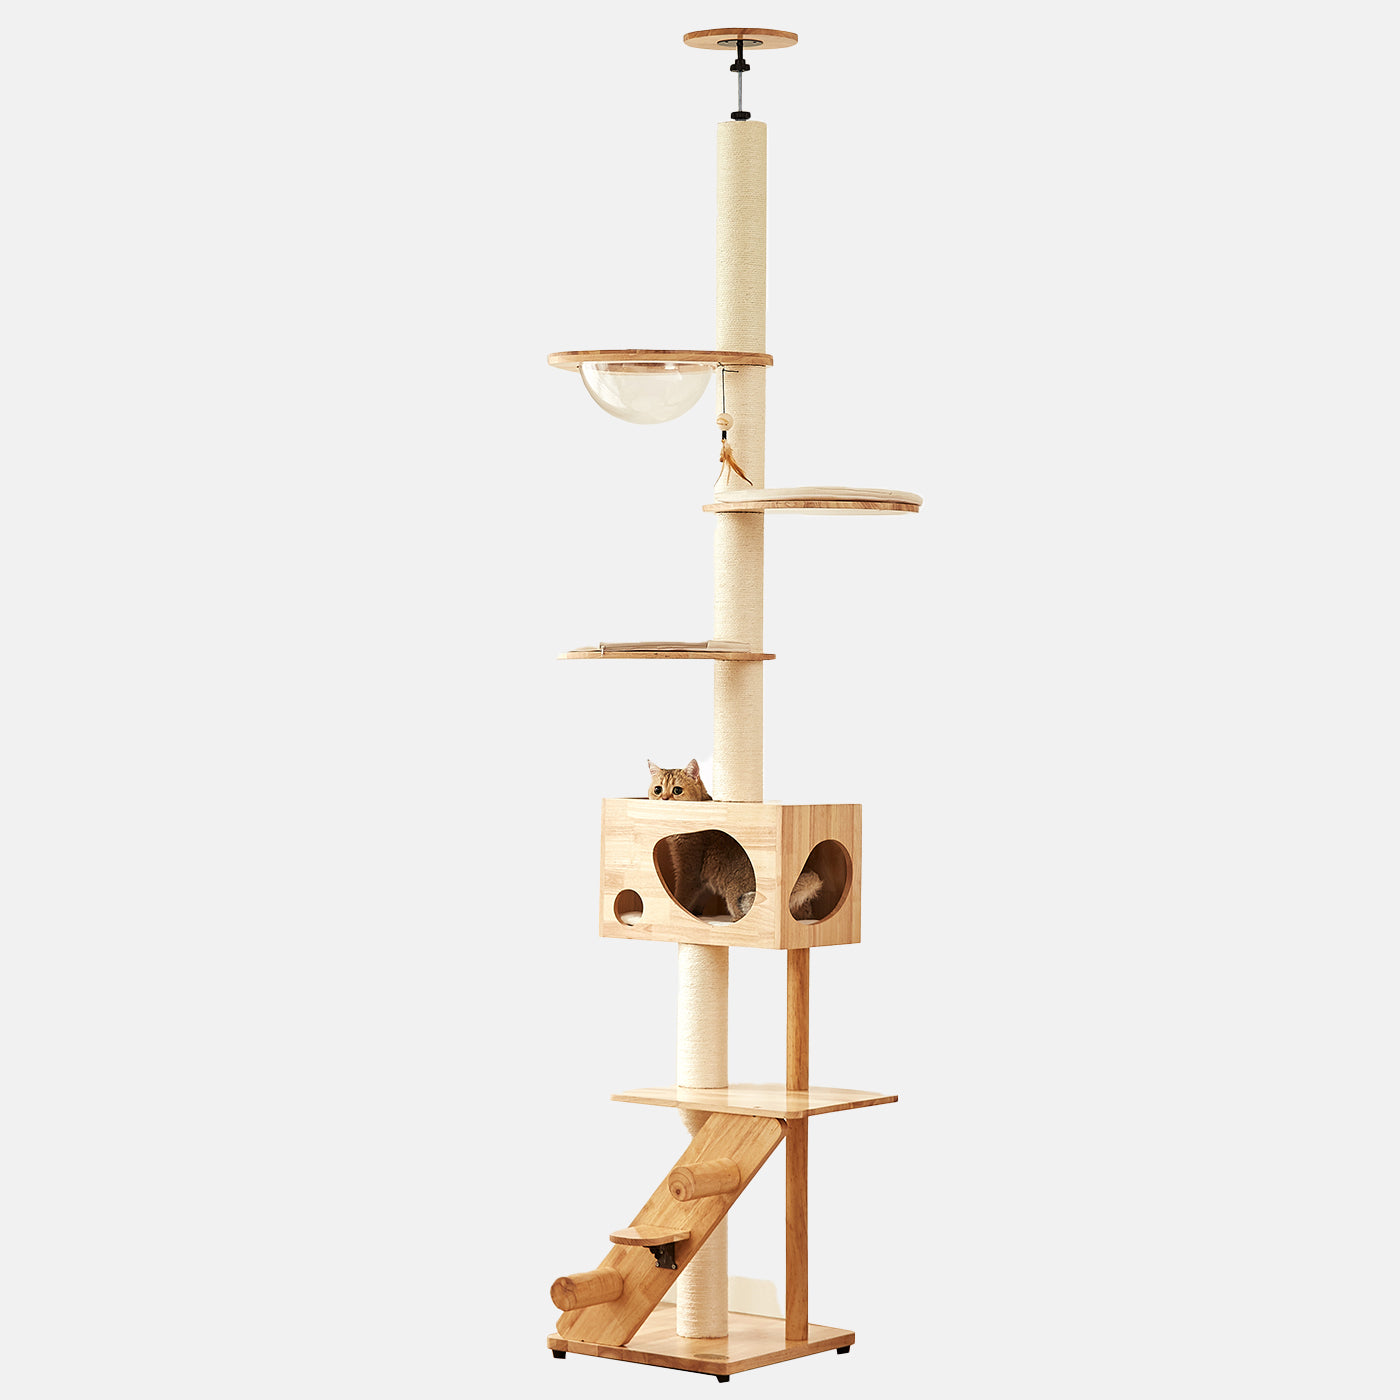 Discover the Ultimate Cat Tree! Helsinki The Levels Fit Me Cat Play Centre. Present your cat with the perfect multi-tier cat play centre! Crafted using durable and long-lasting wood, this modern cat play centre features floor to ceiling for extra stability with cosy hammock, hanging cat toy, steps and scratch posts to build the ultimate cat activity centre! Available now at Lords & Labradors